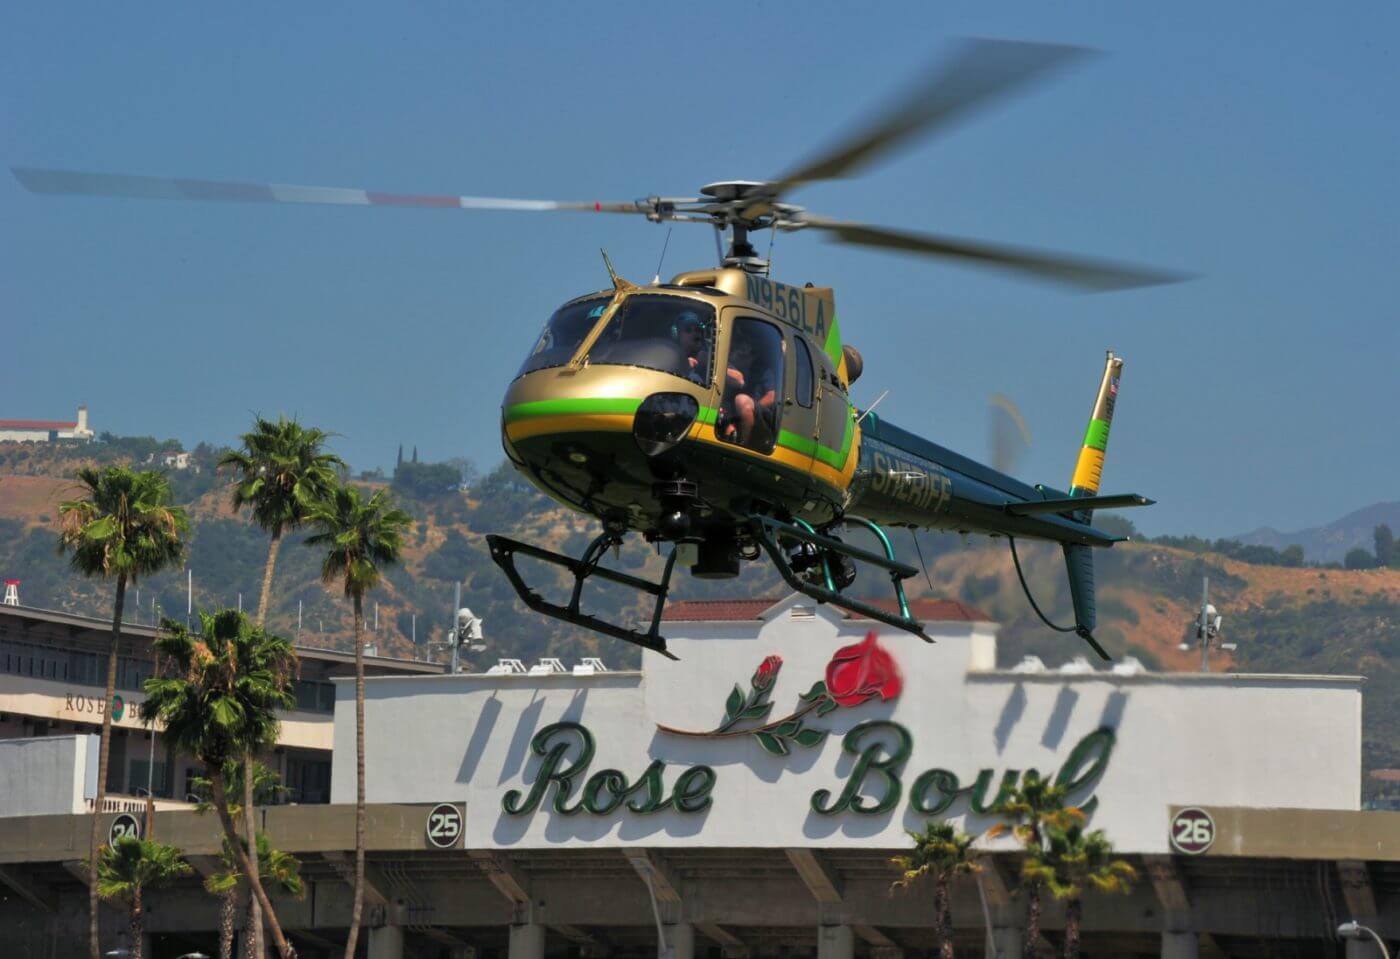 An L.A. County Sheriff's Department AStar arrives at the Rose Bowl.